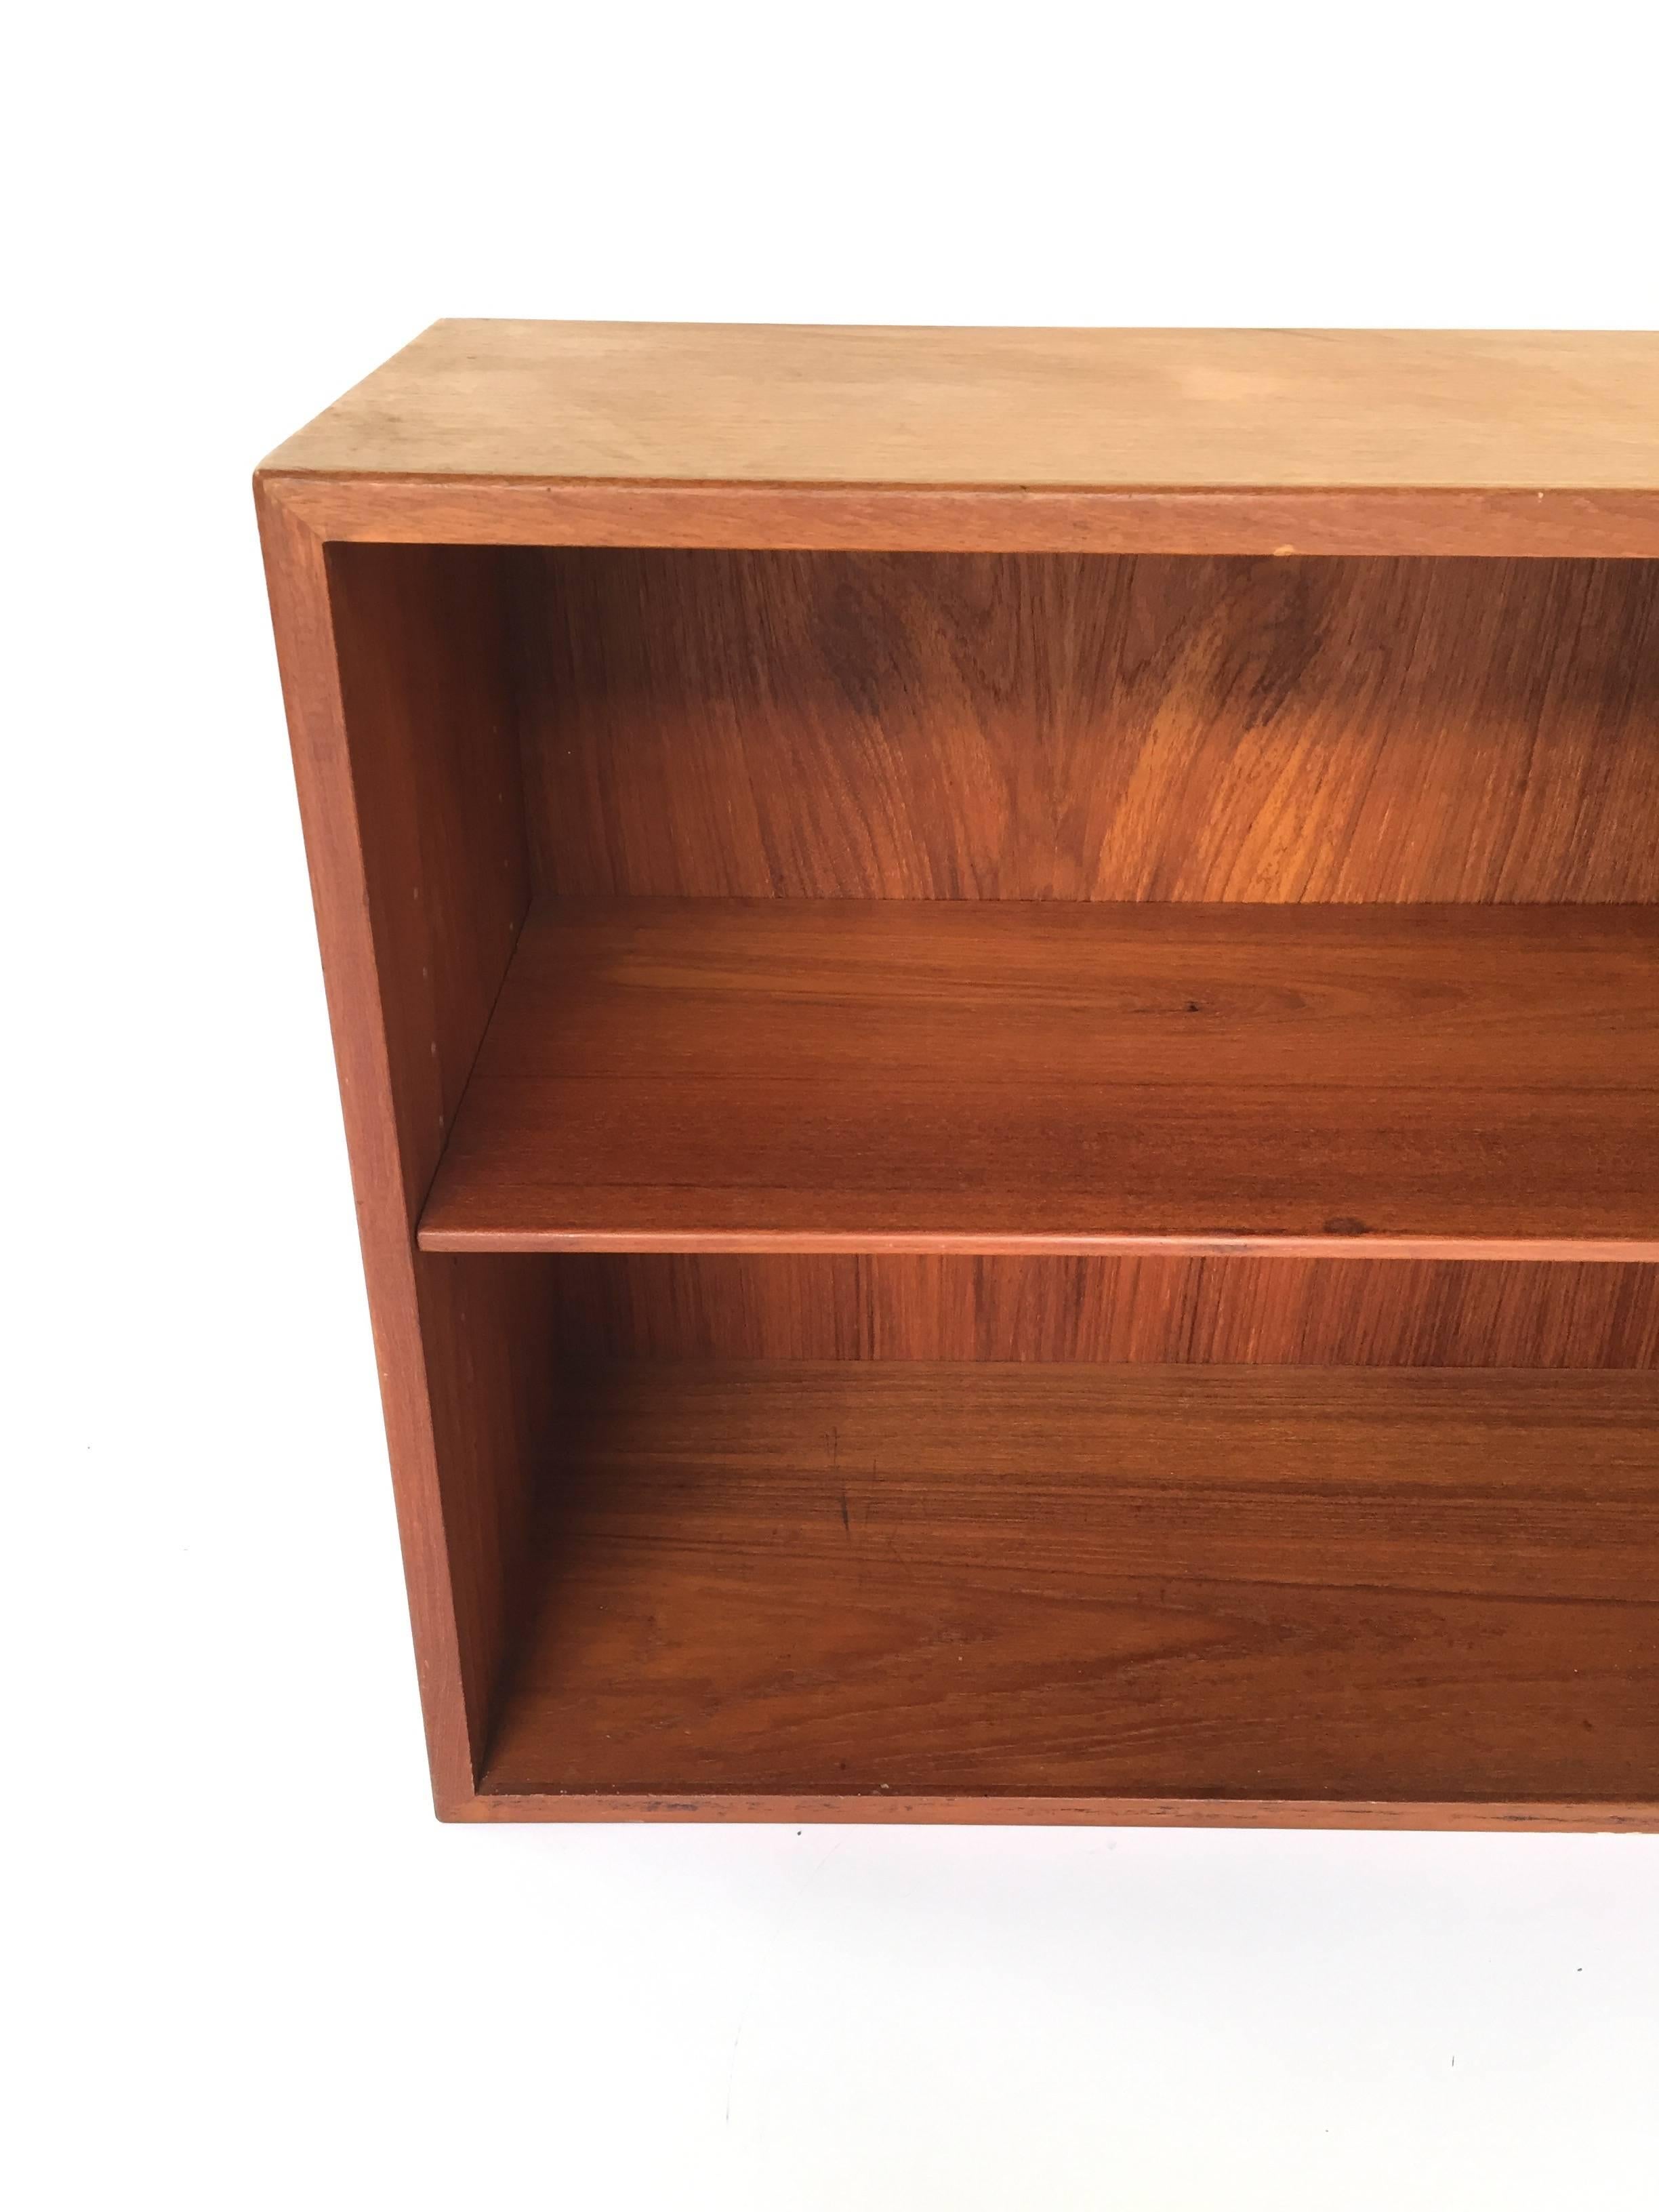 Small size teak book case by Børge Mogensen for Illums Bolighus. Middle level is adjustable to allow for custom needs.